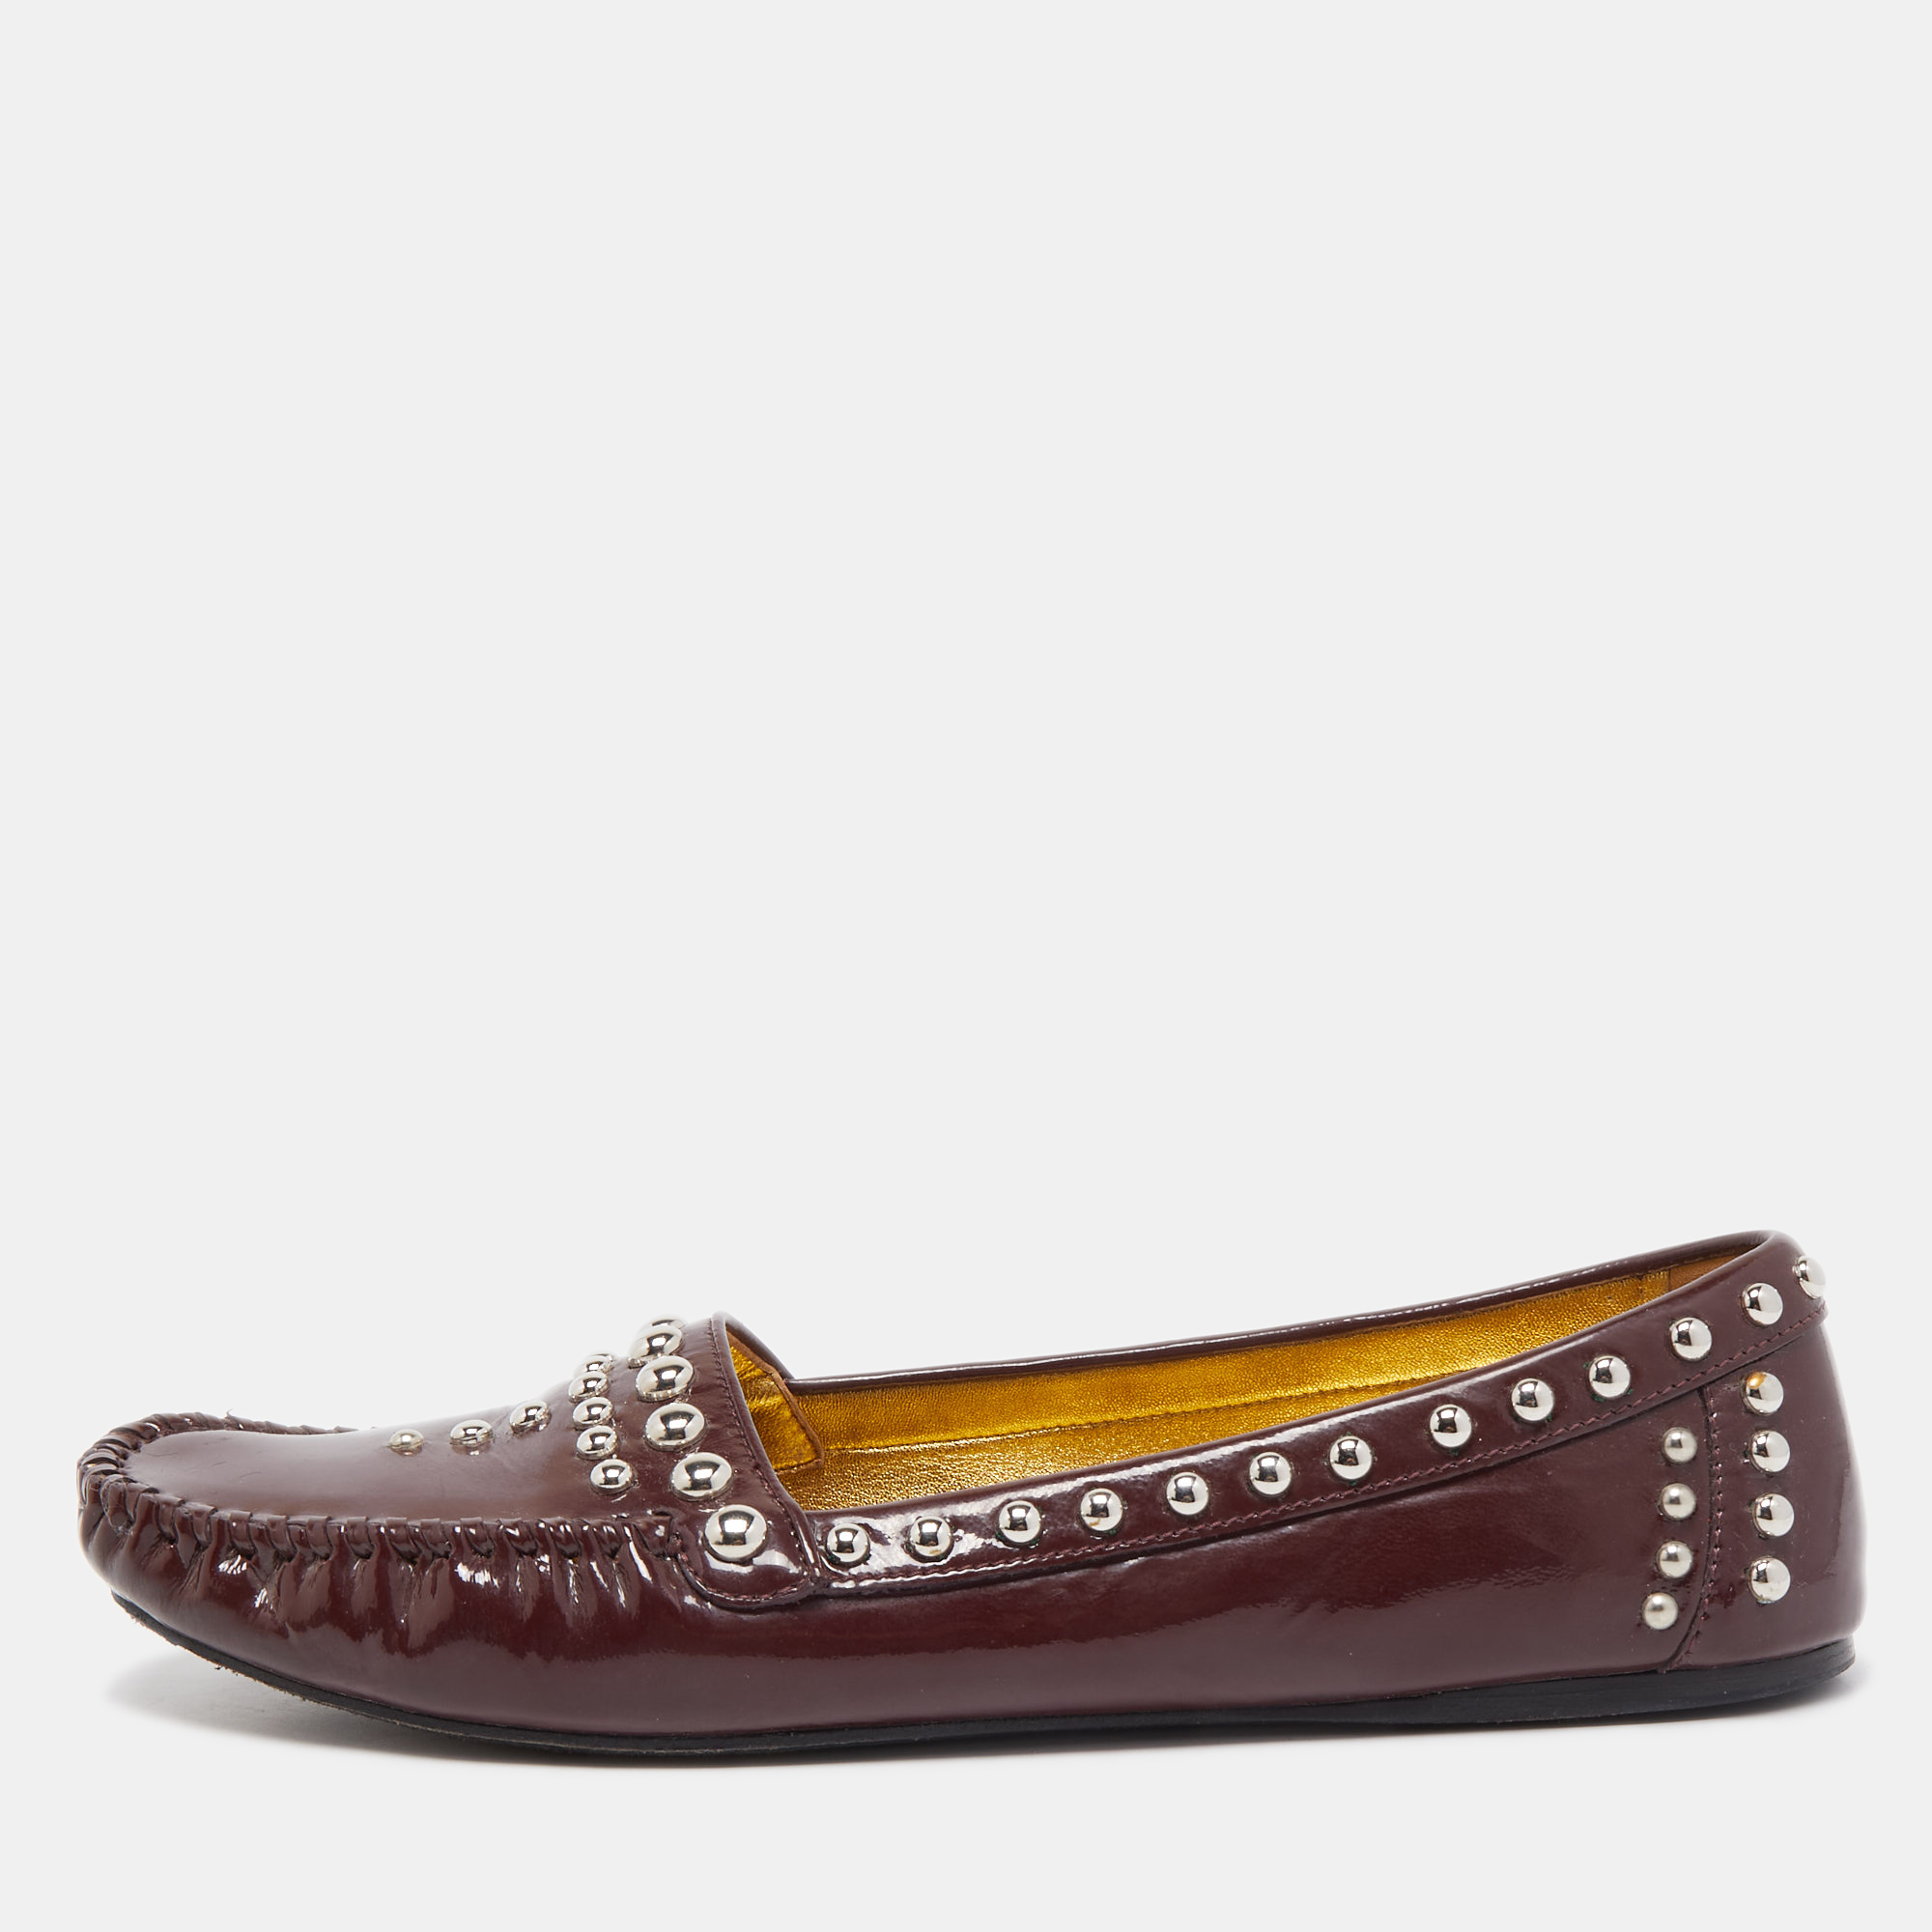 Pre-owned Prada Burgundy Patent Leather Studded Loafers Size 39